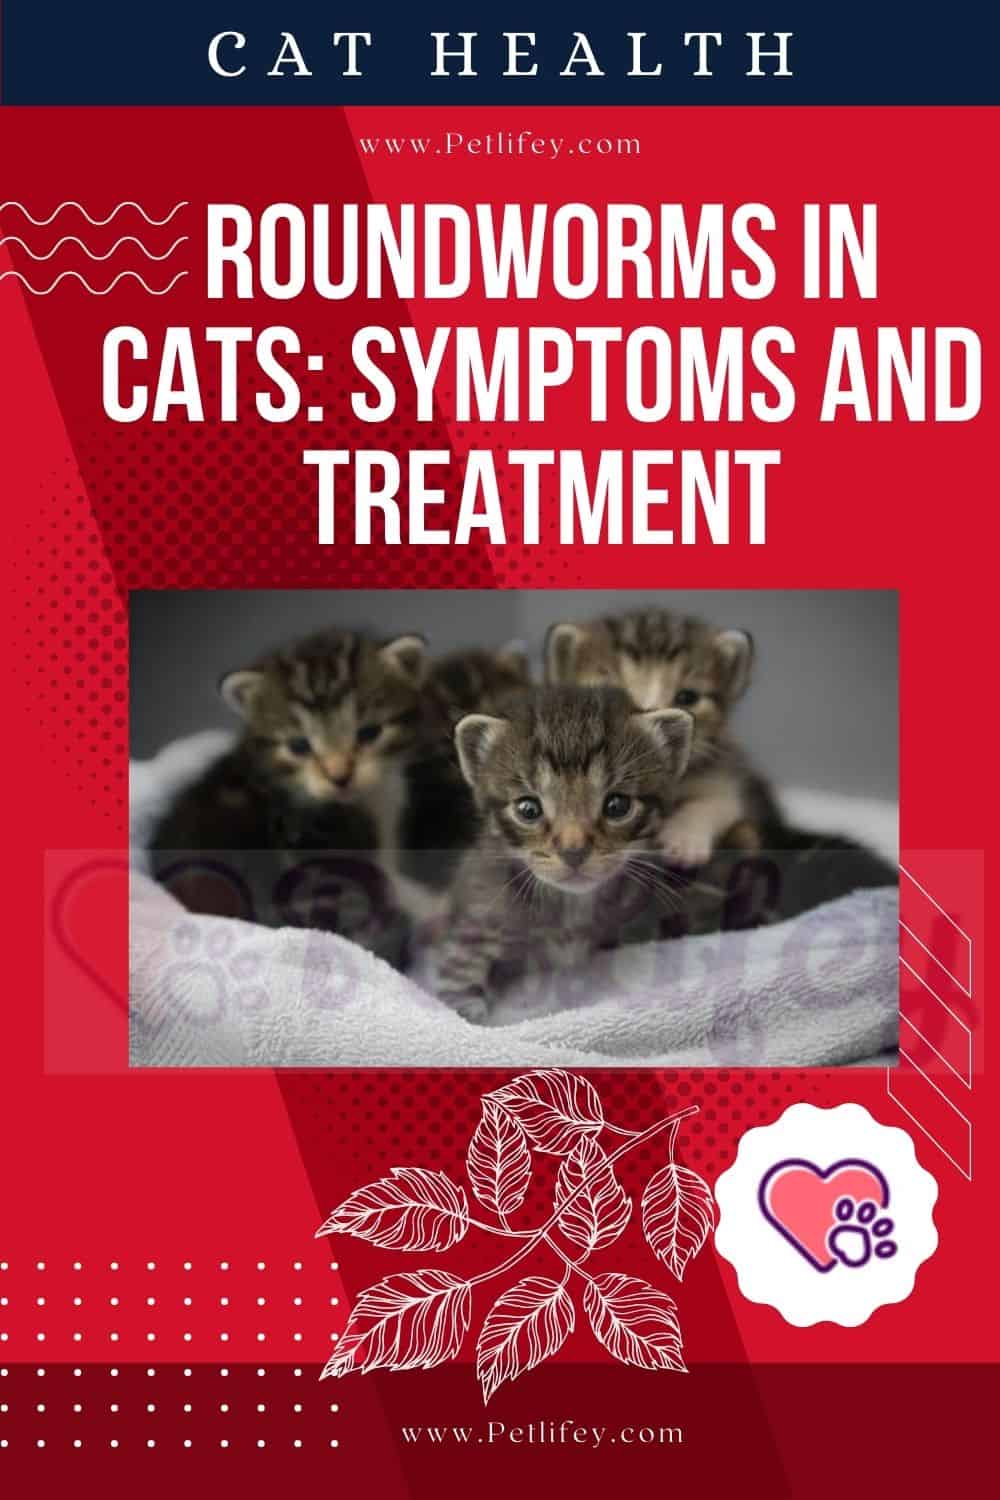 Roundworms in cats